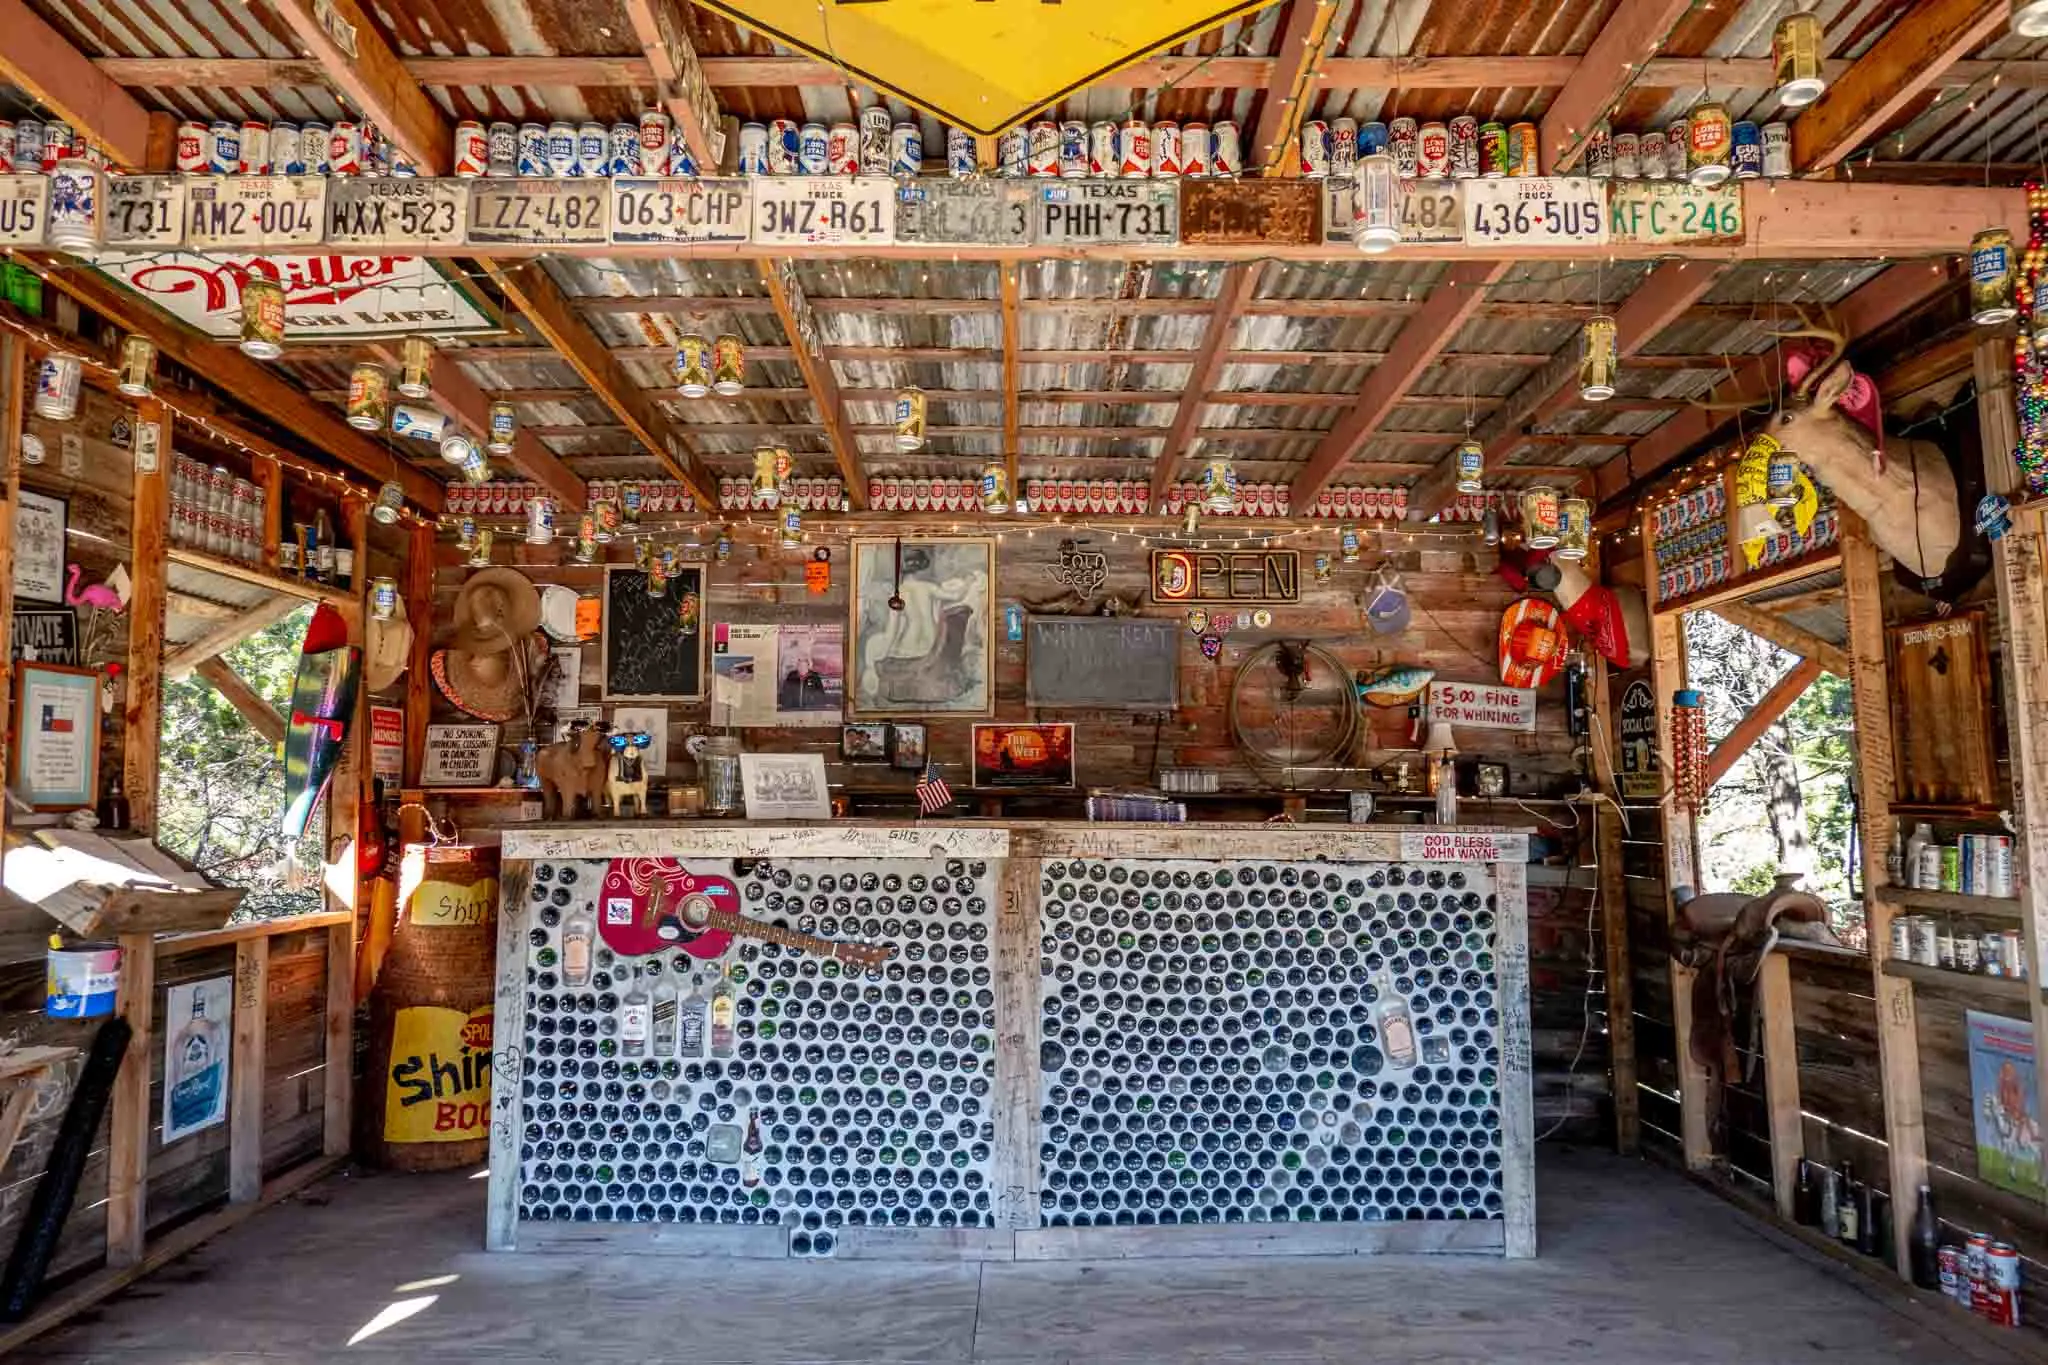 A bar made of glass bottles in a room covered with signs and beer cans